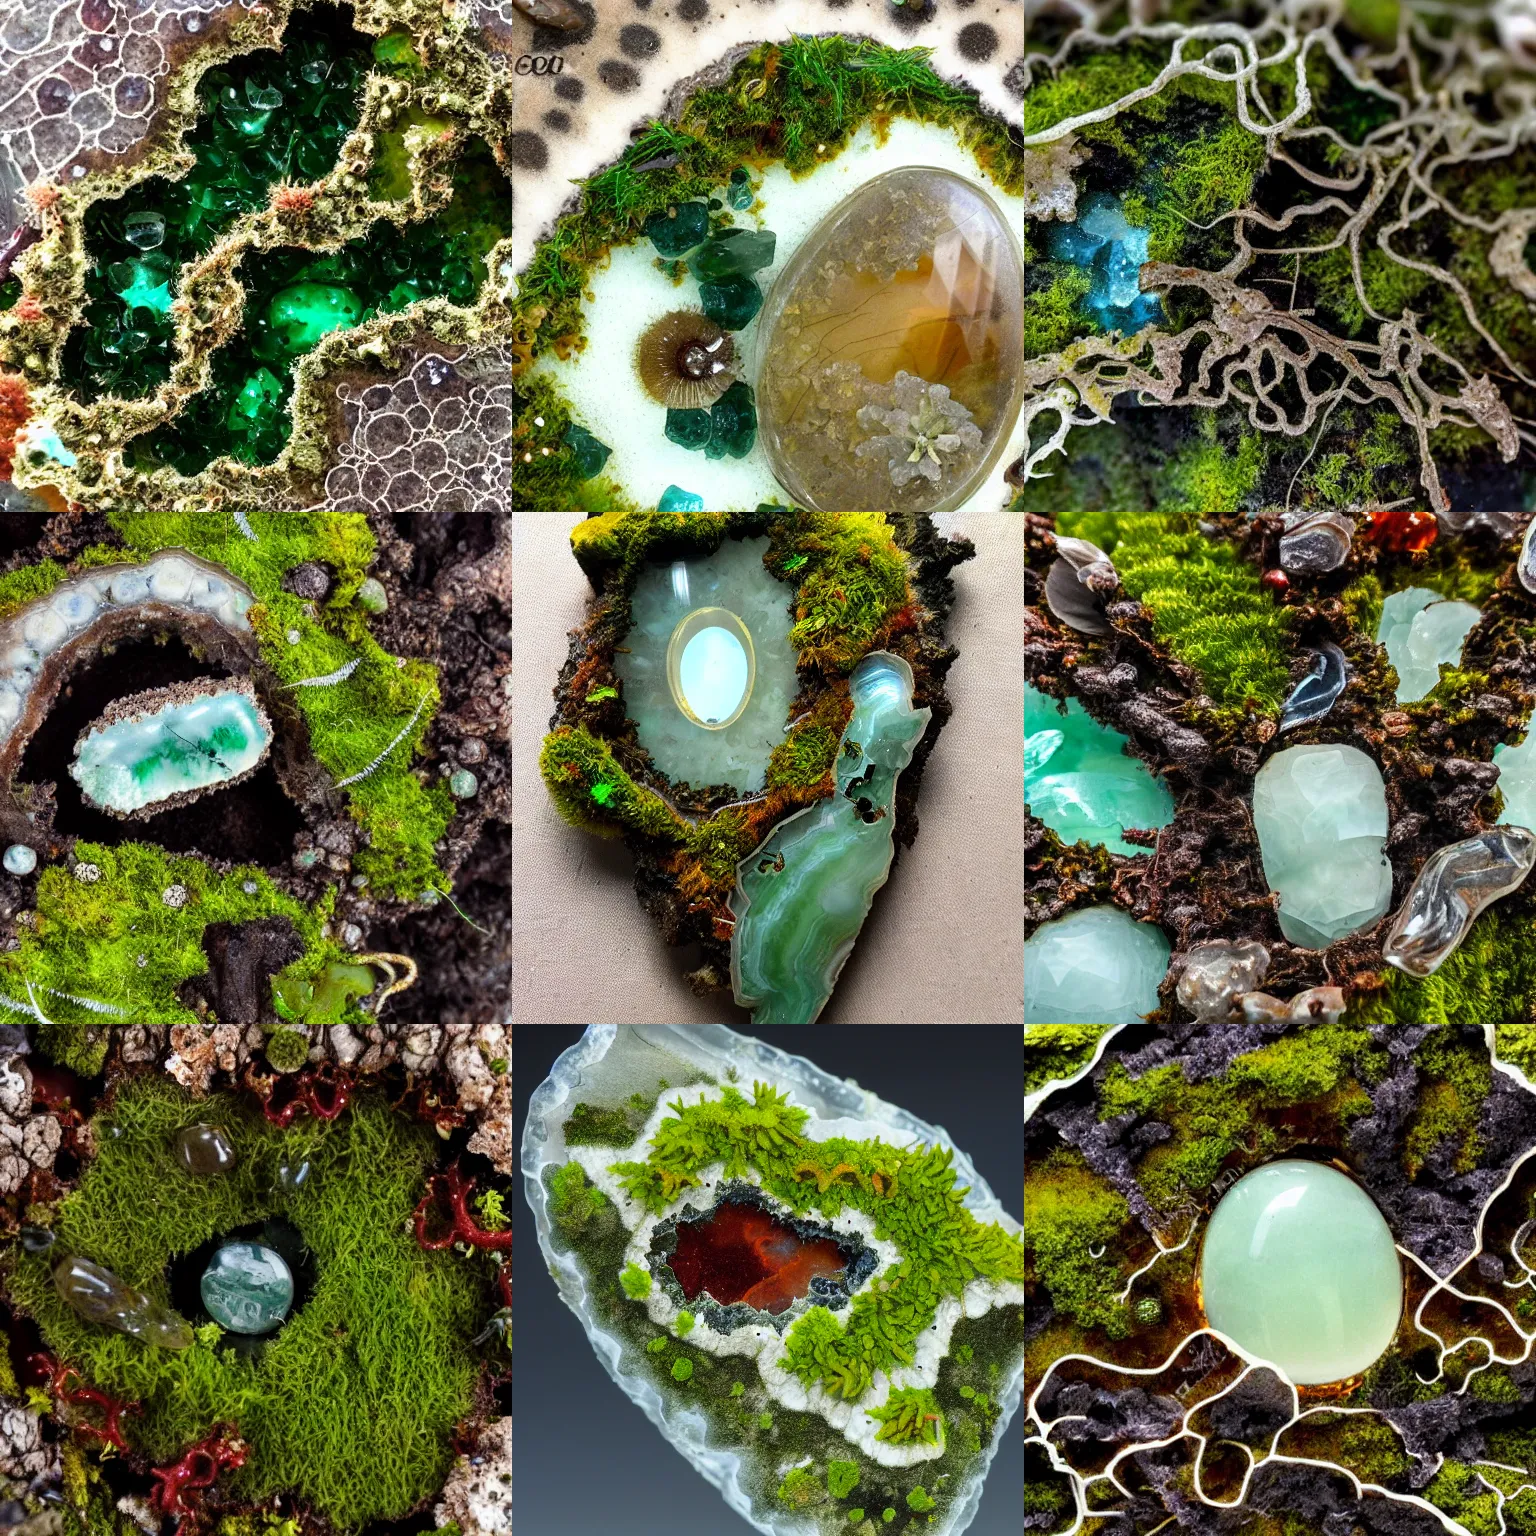 Prompt: close up of moss agate with various living ecosystem growing inside, insanely detailed